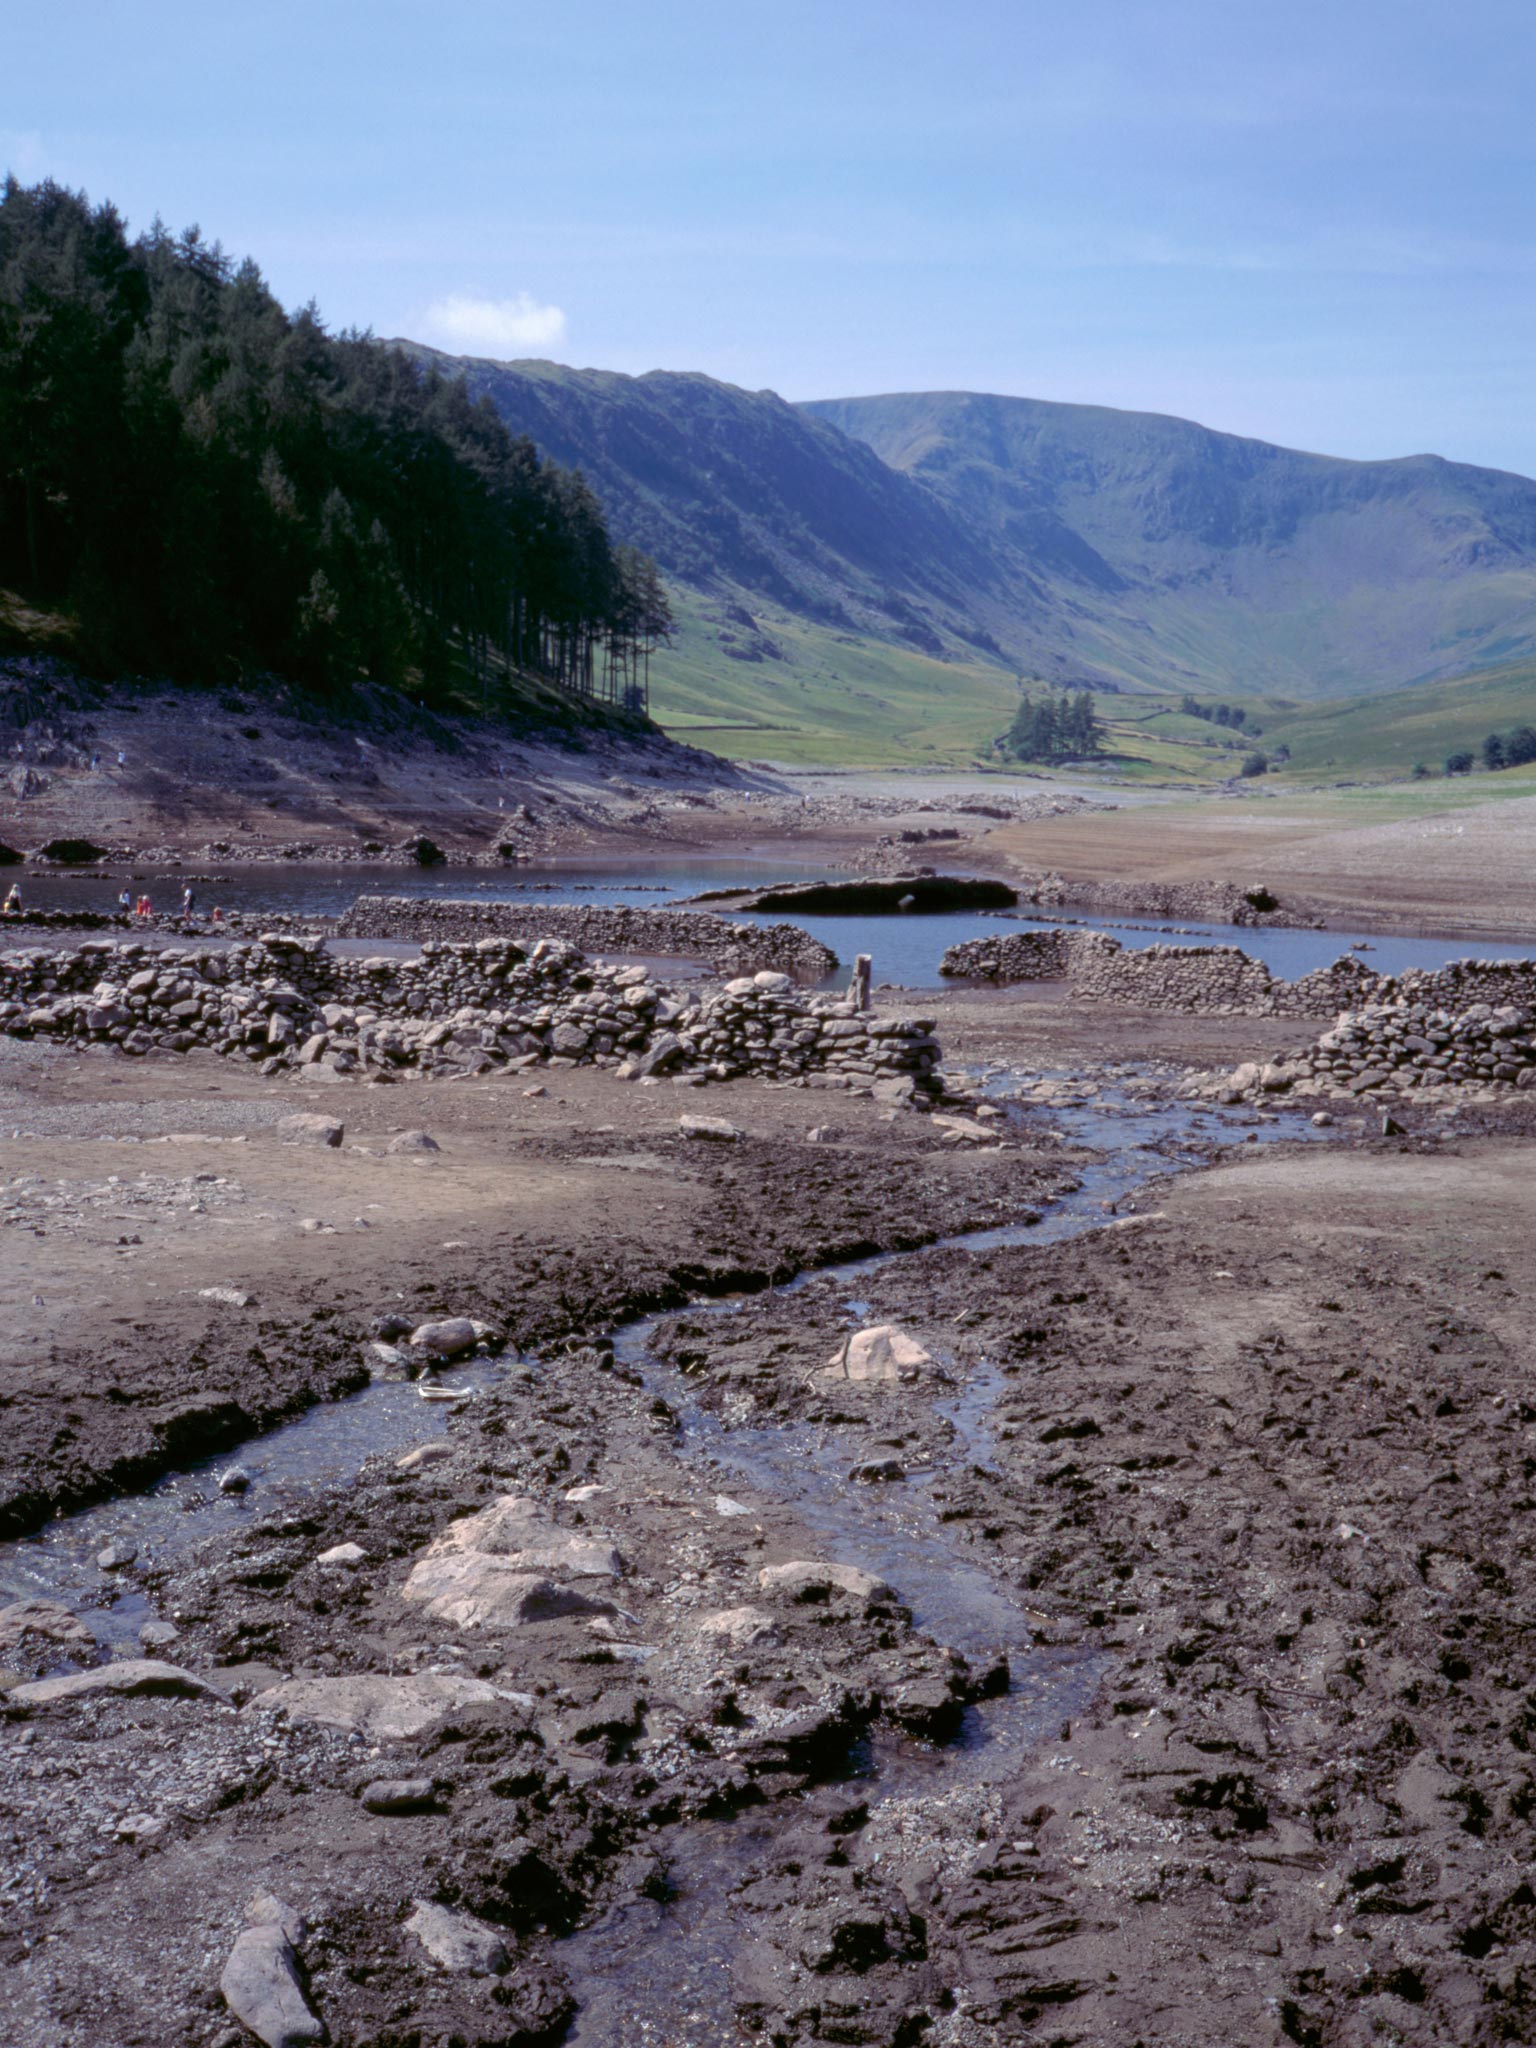 Buried treasure: the drowned village of Mardale